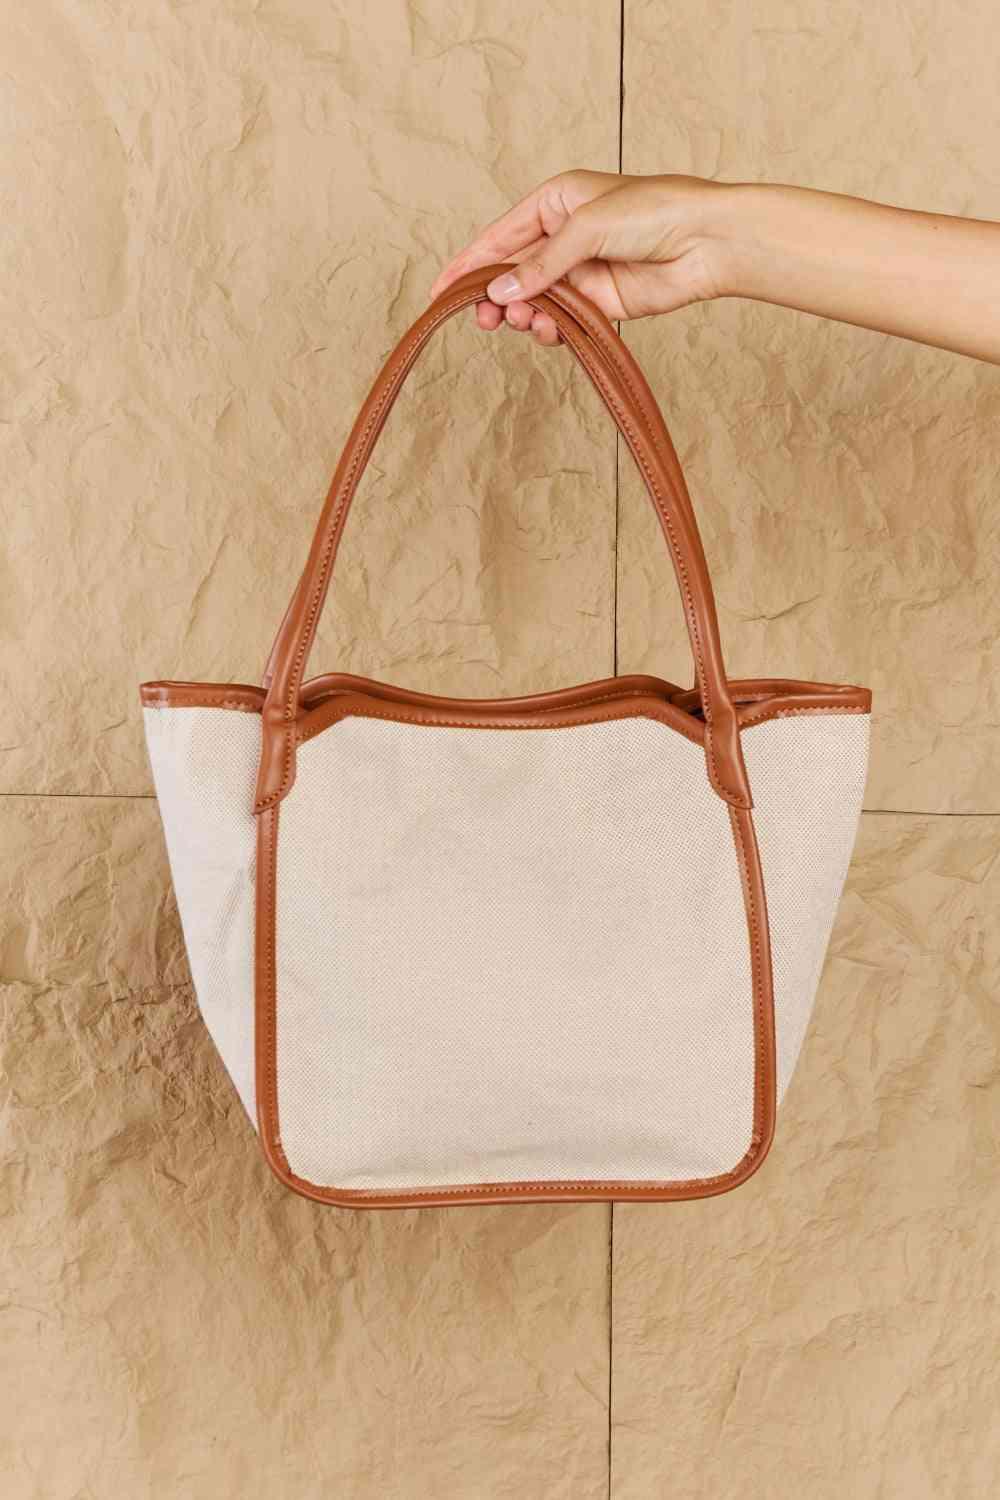 Fame Beach Chic Faux Leather Trim Tote Bag in Ochre - SwagglyLife Home & Fashion